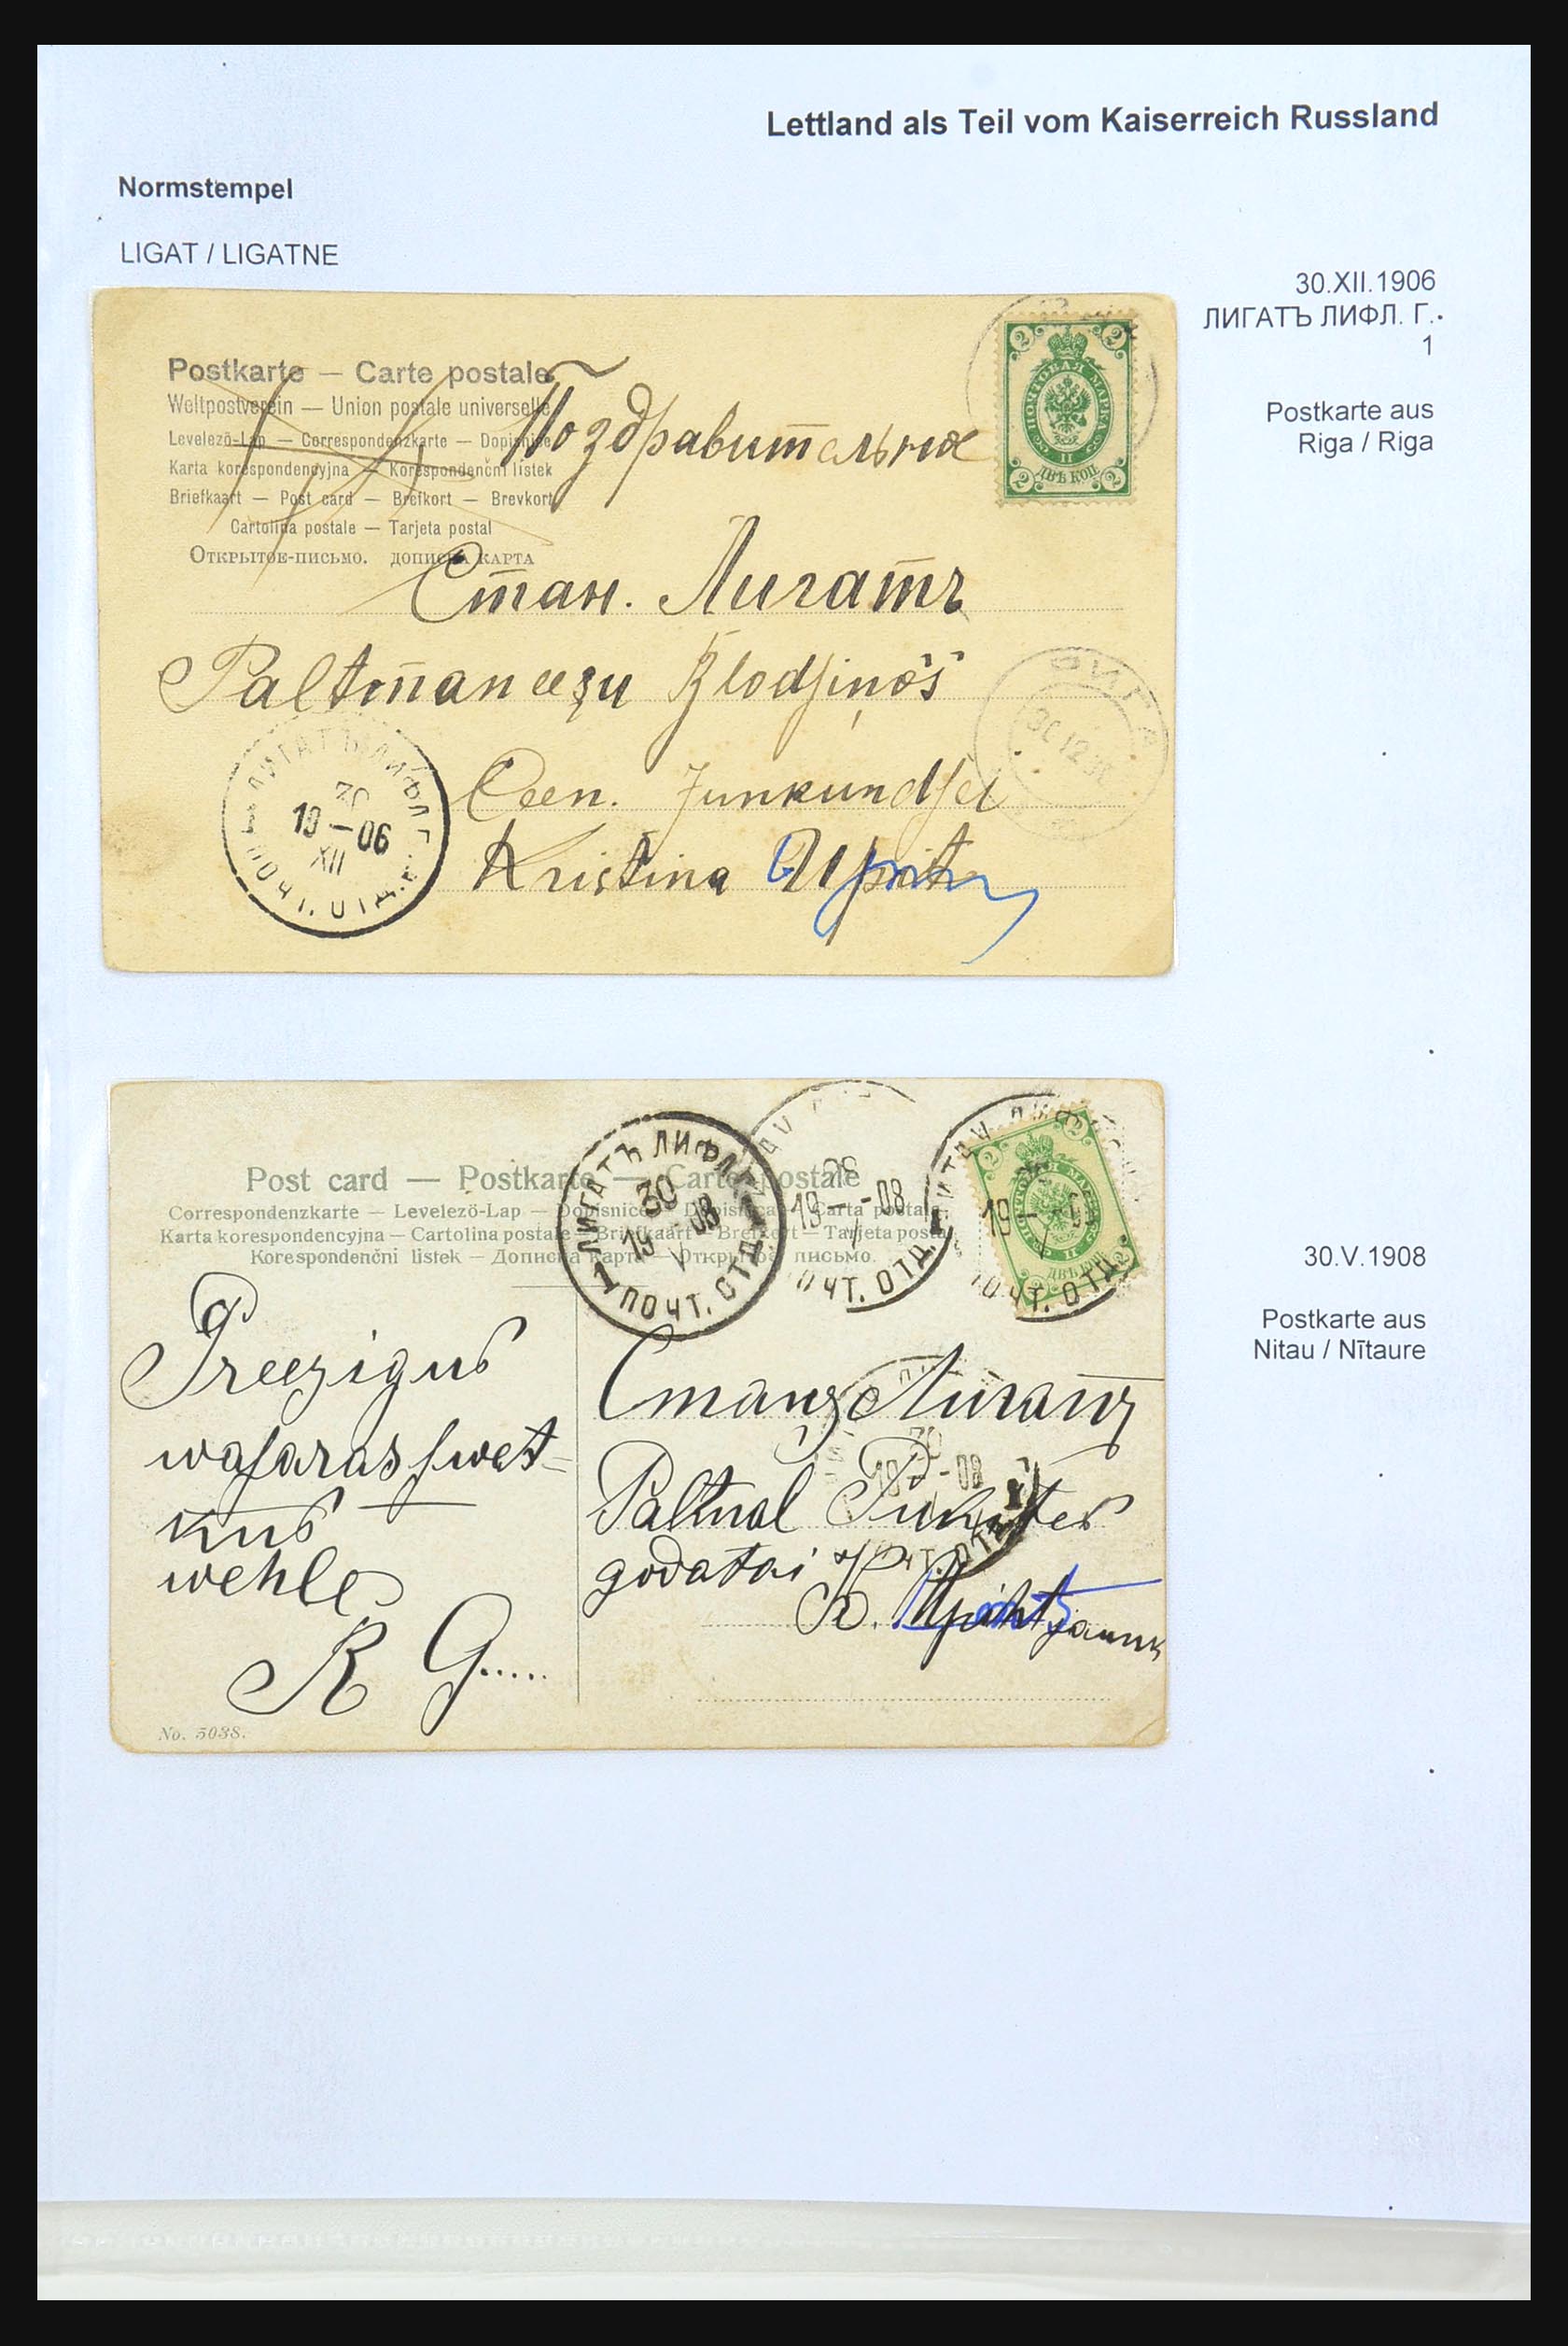 31305 030 - 31305 Latvia as part of Russia 1817-1918.